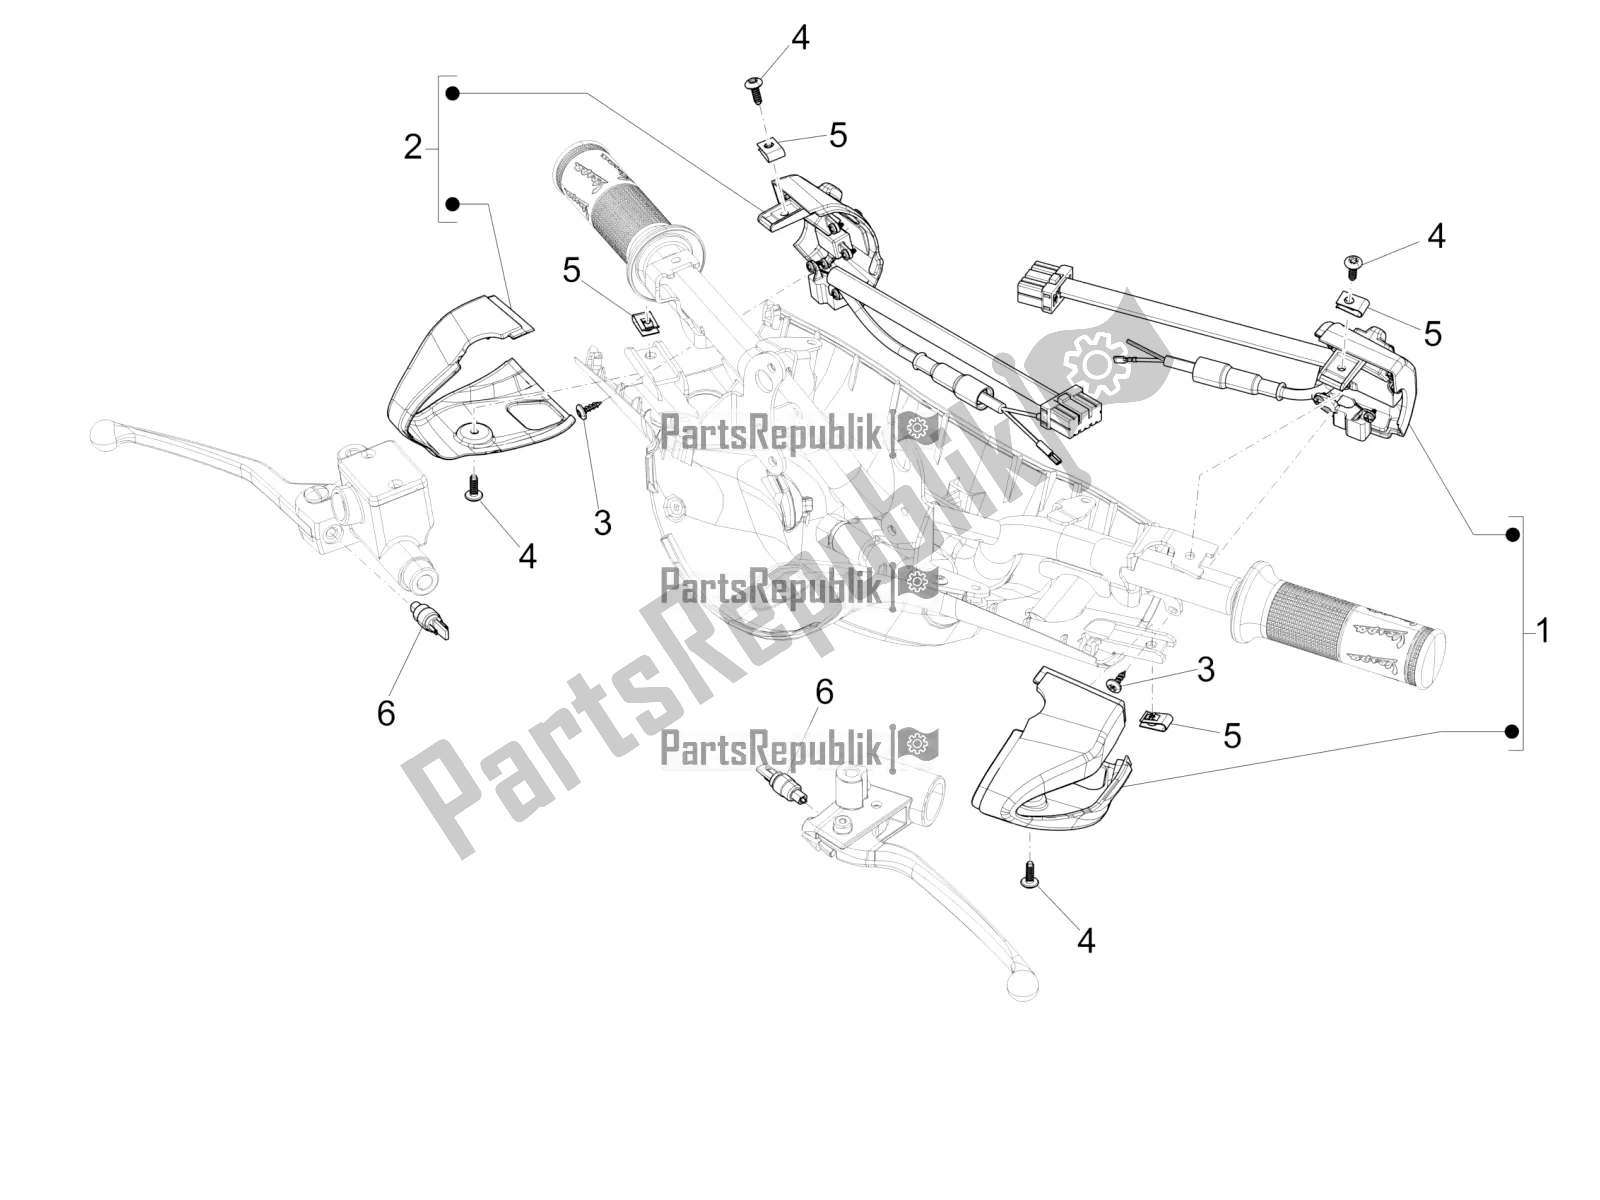 All parts for the Selectors - Switches - Buttons of the Vespa Primavera 125 IE 2016